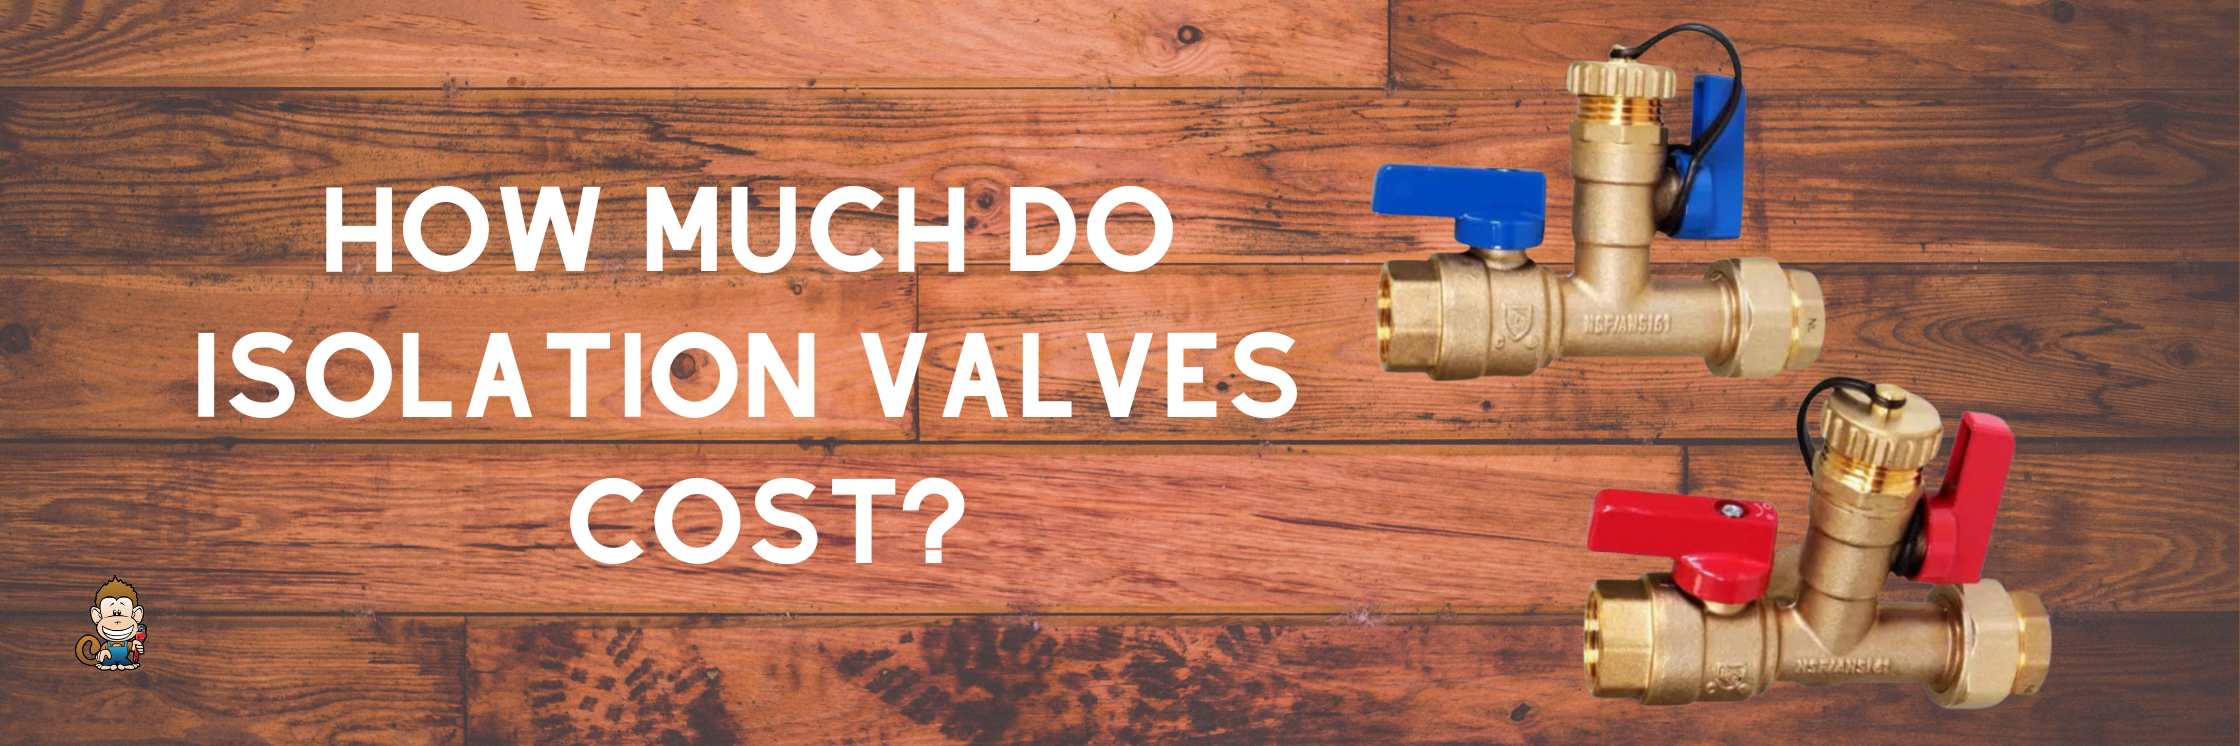 How Much Do Isolation Valves Cost?